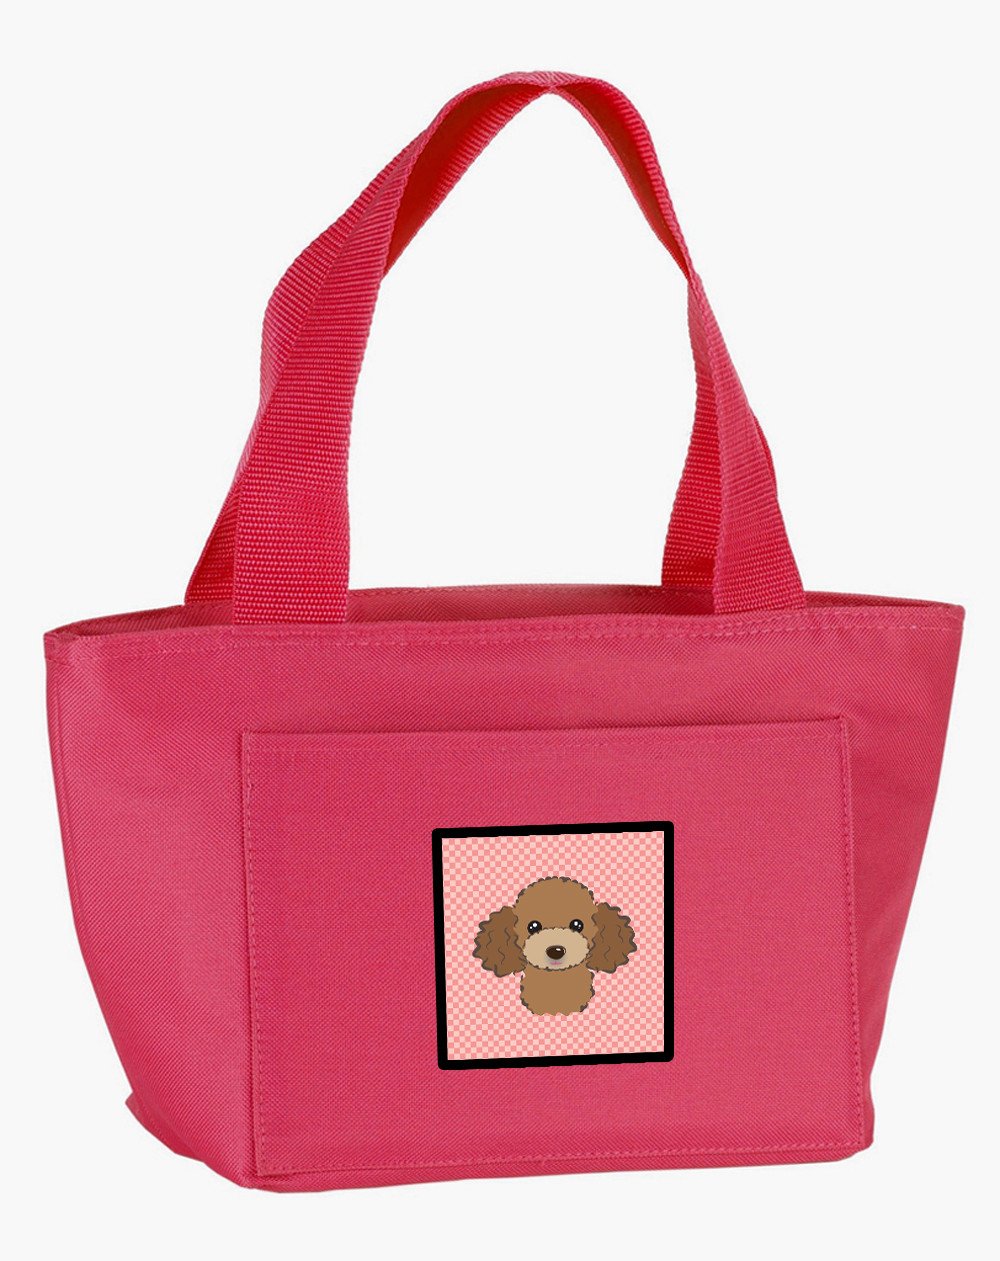 Checkerboard Pink Chocolate Brown Poodle Lunch Bag BB1256PK-8808 by Caroline's Treasures